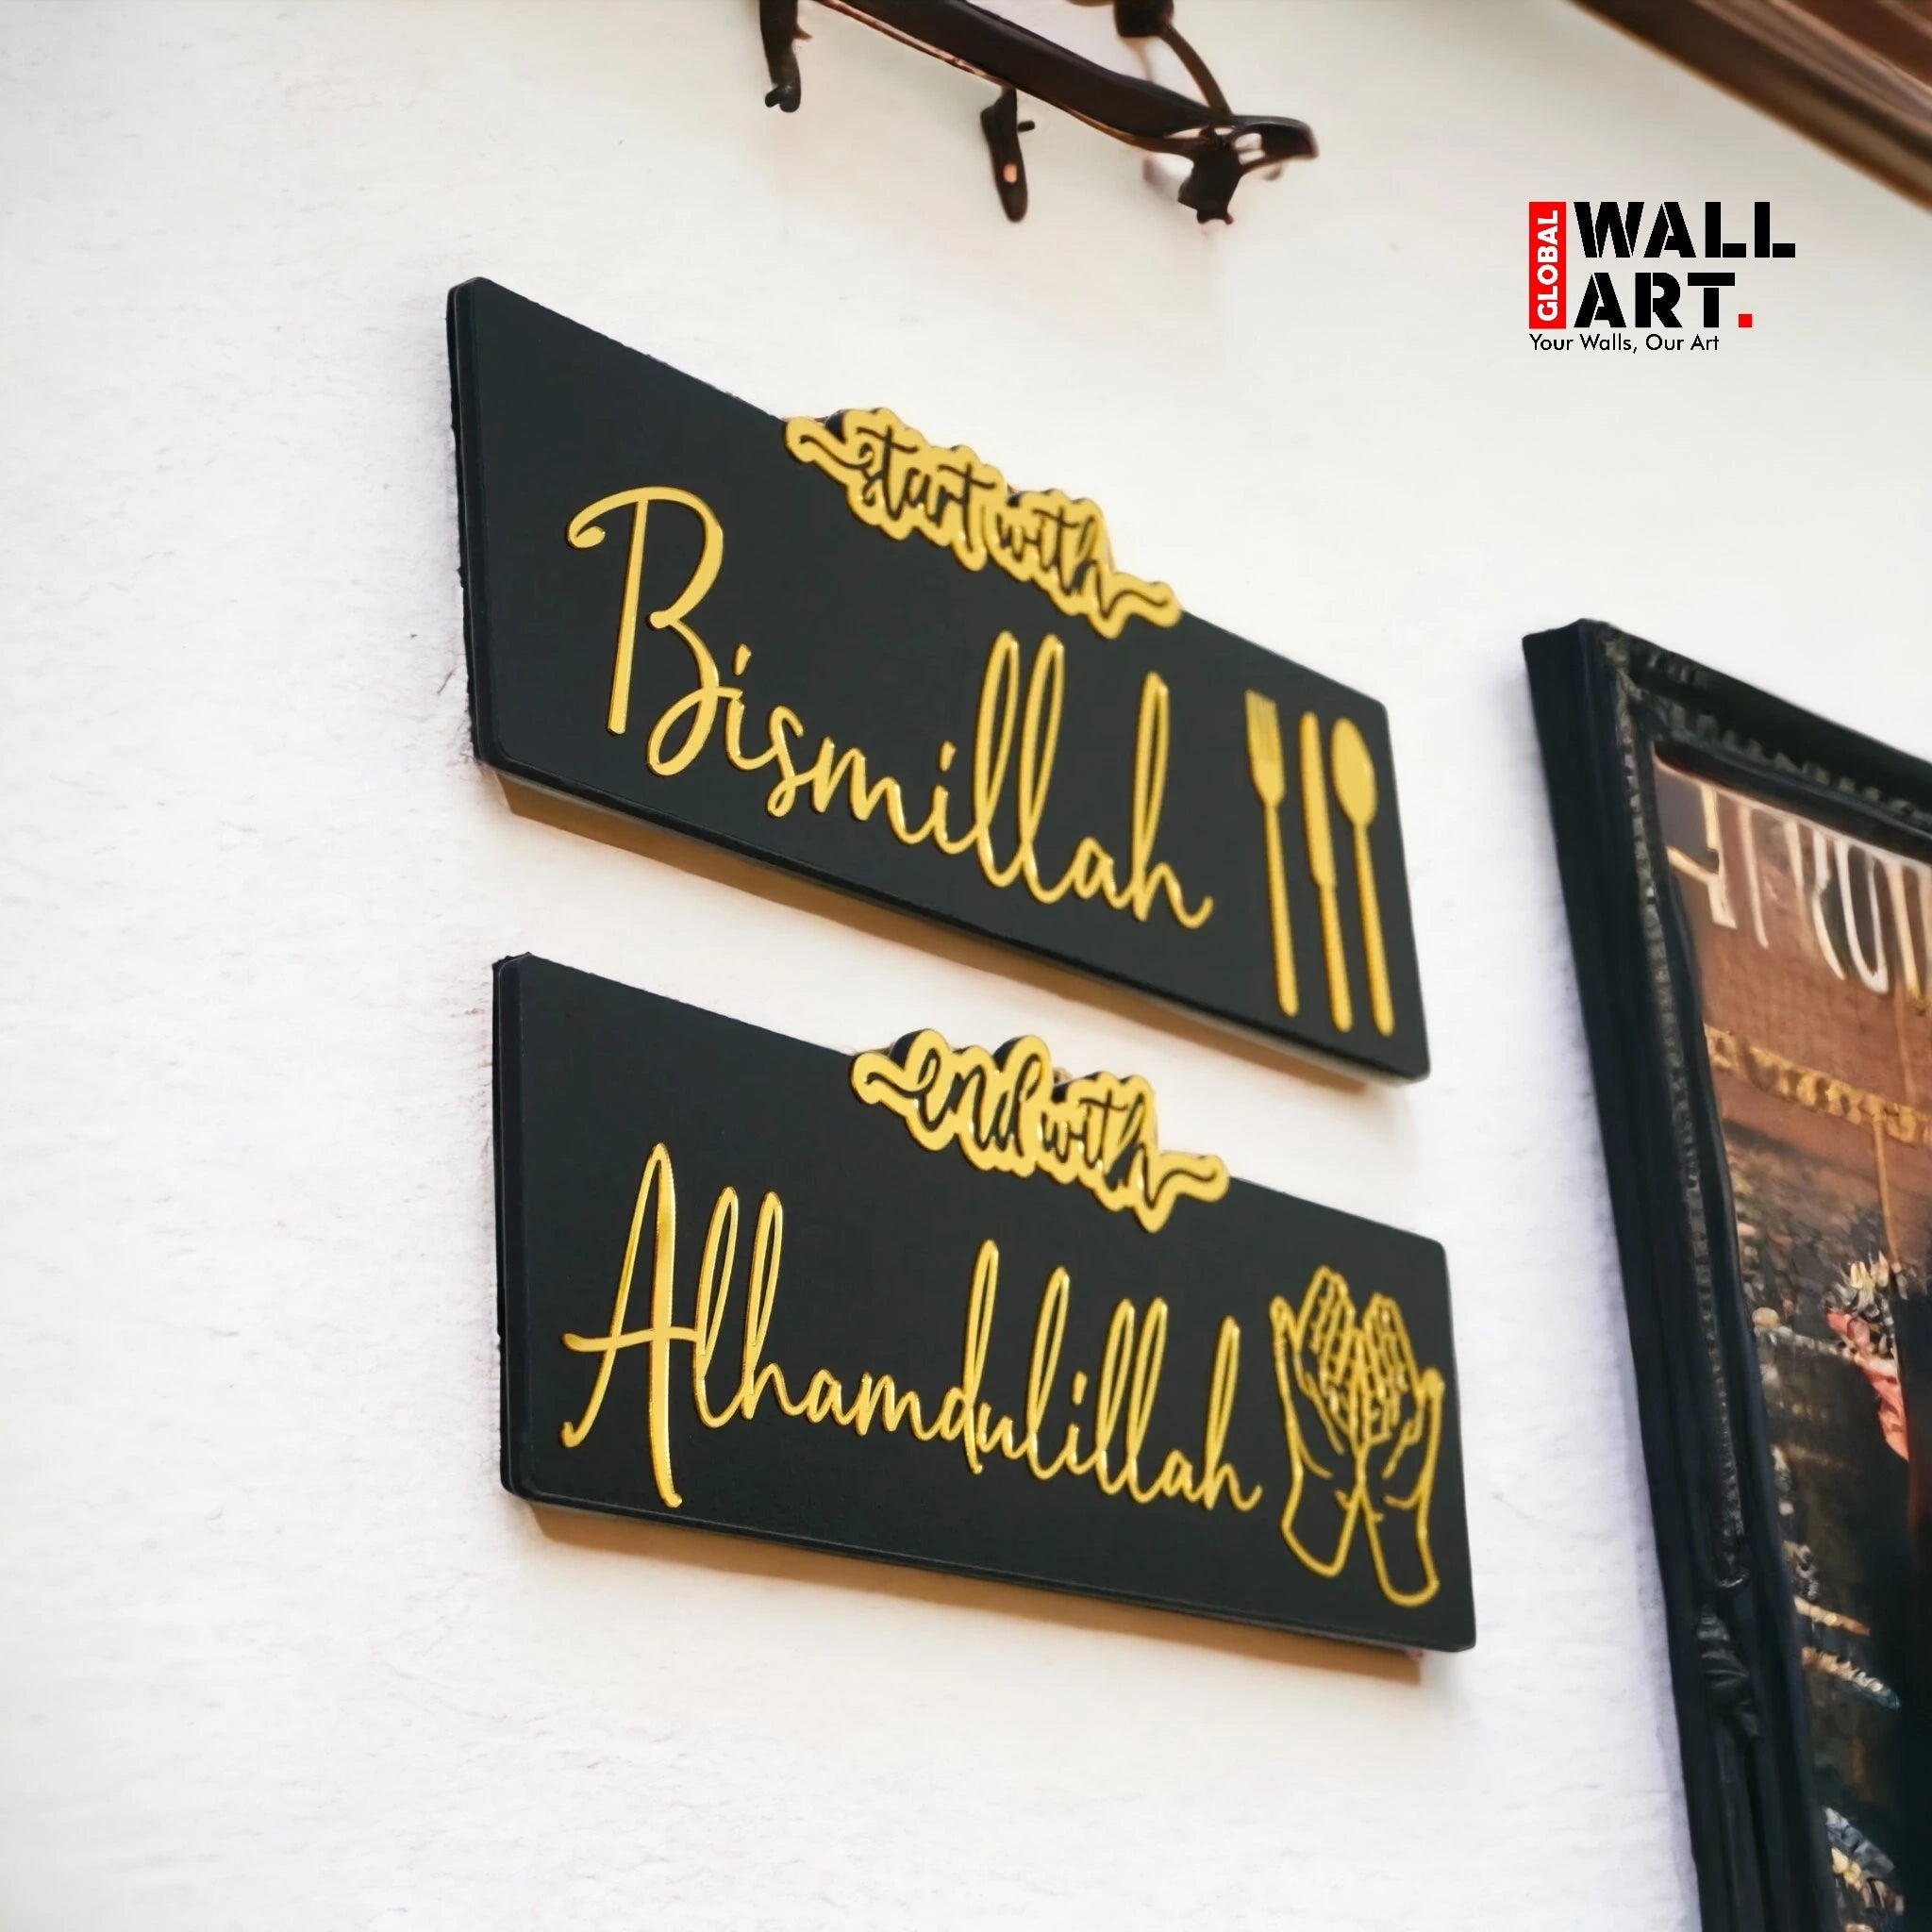 Start with Bismillah - End with Alhamdulillah, Wooden Acrylic Islamic Wall Art 